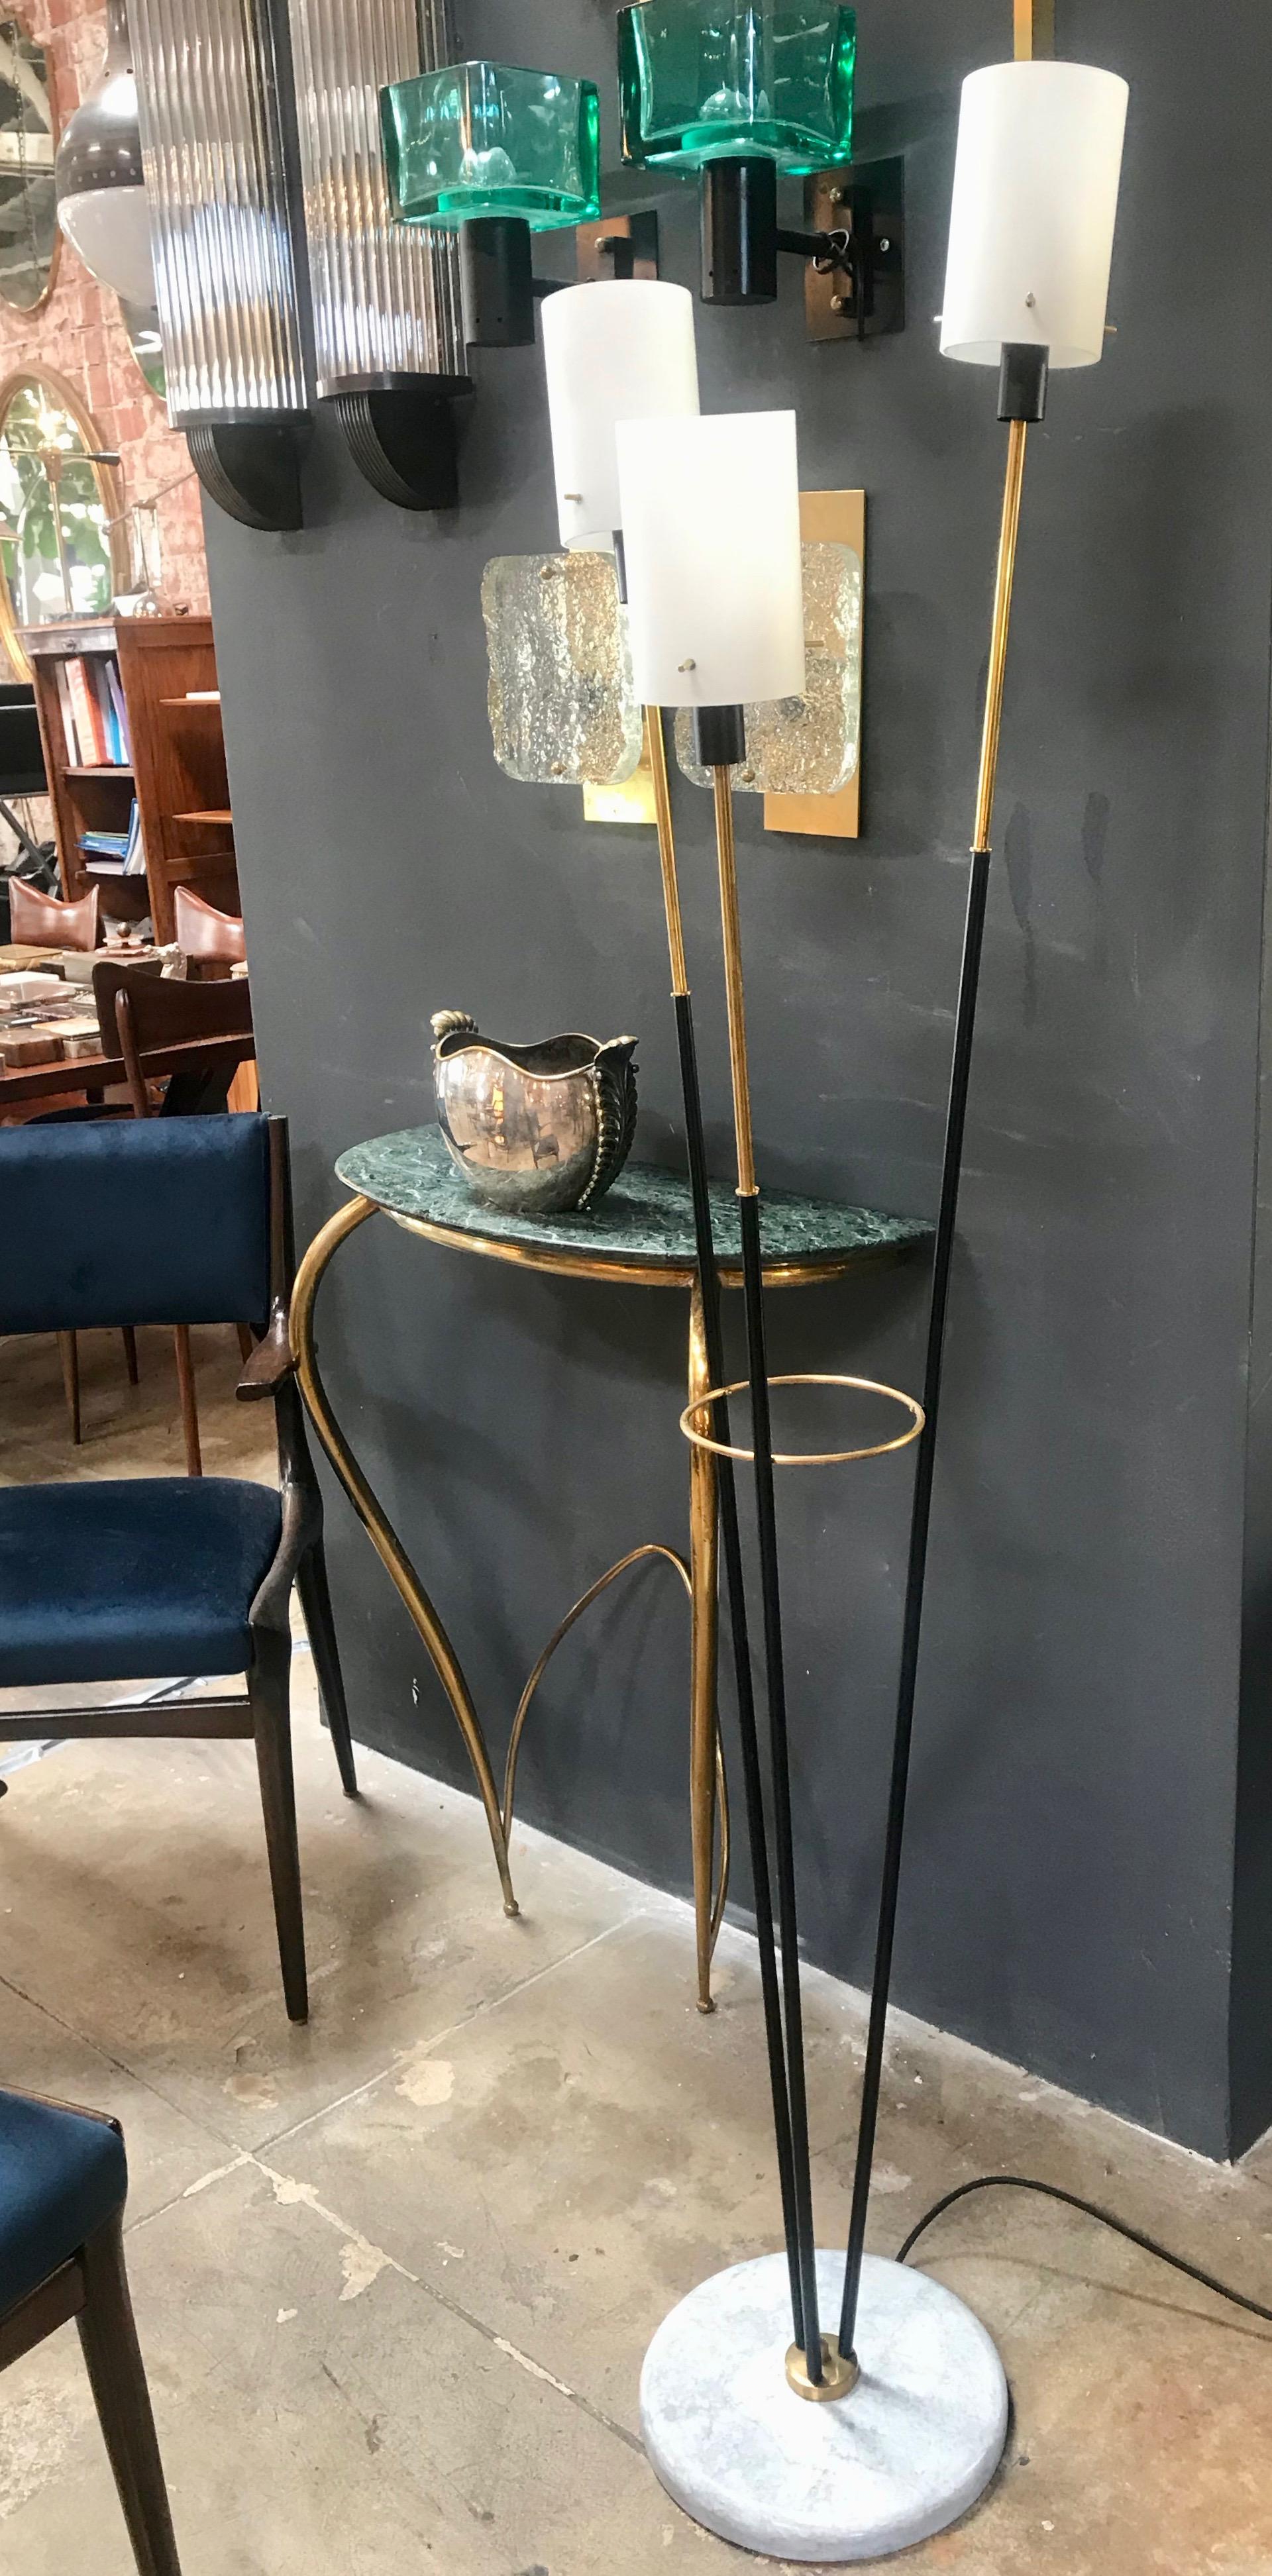 Three-arm floor lamp in brass and metal with opaline prisms and marble base, Italy 1950s.
The diameter of the opaline prism is 3.8 in.
The lamp is in good vintage condition and there is patina on the brass parts.